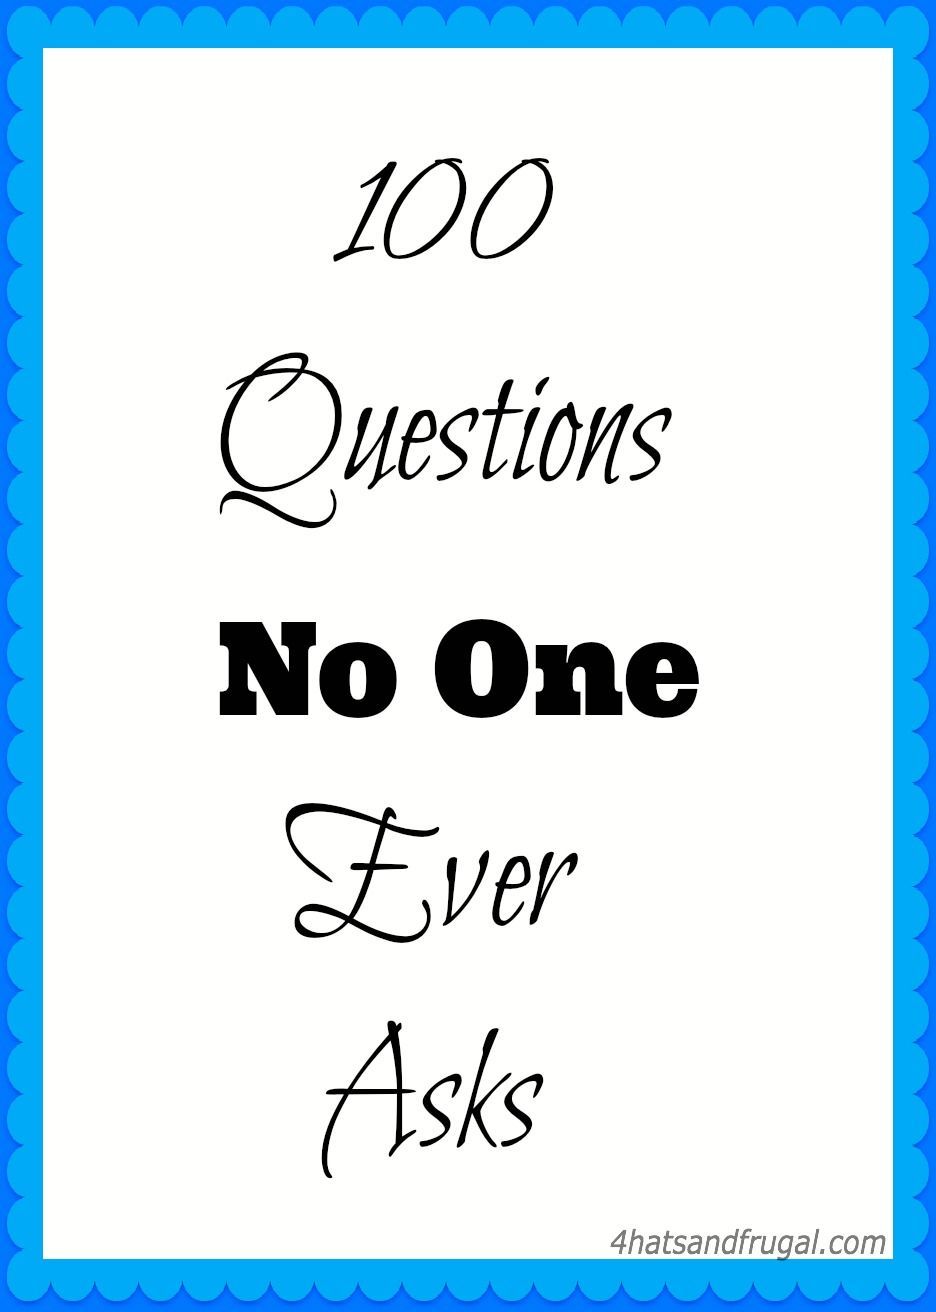 100 Questions No One Ever Asks tag; all questions are listed in this post.